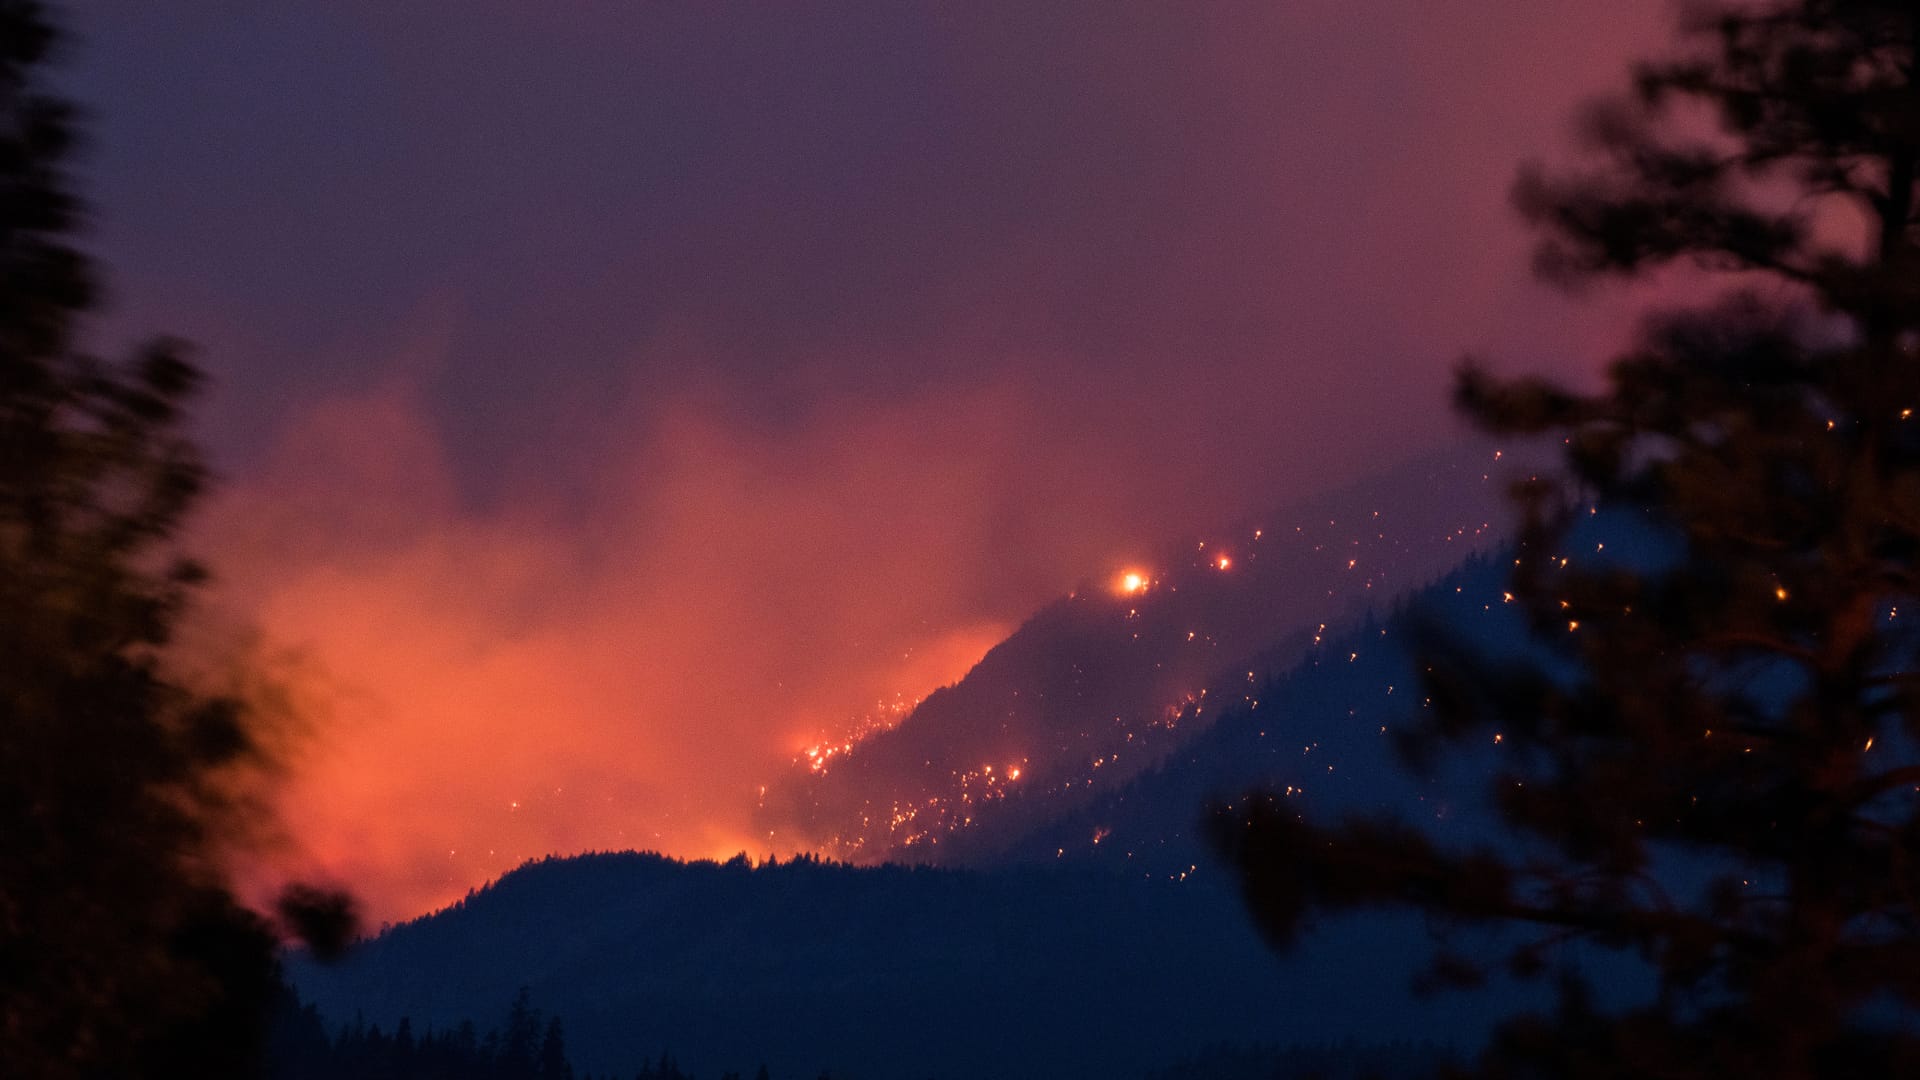 Wildfire burns above the Fraser River Valley near Lytton, British Columbia, Canada, on Friday, July 2, 2021. A protracted heat wave continues to fuel scores of wildfires in Canada's western provinces, with Prime Minister Justin Trudeau calling an emergency meeting of a cabinet crisis group to address the matter.